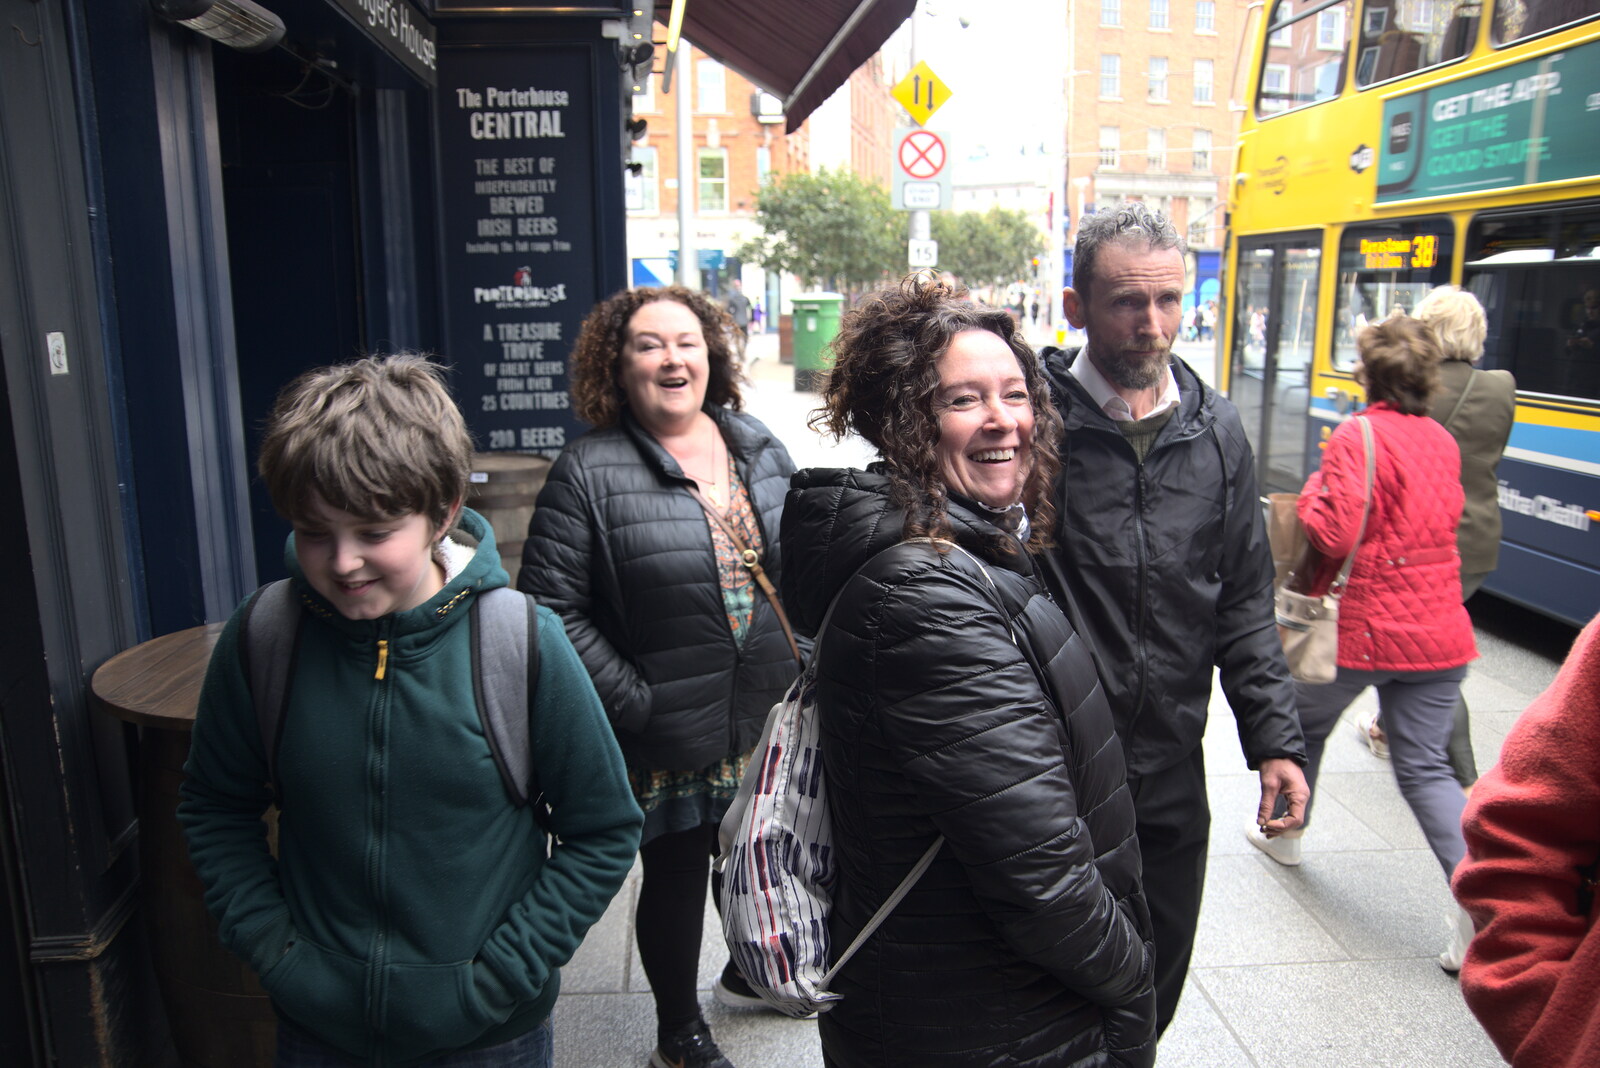 Blackrock North and South, Louth and County Dublin, Ireland - 23rd April 2022: Back out on Nassau Street in Dublin